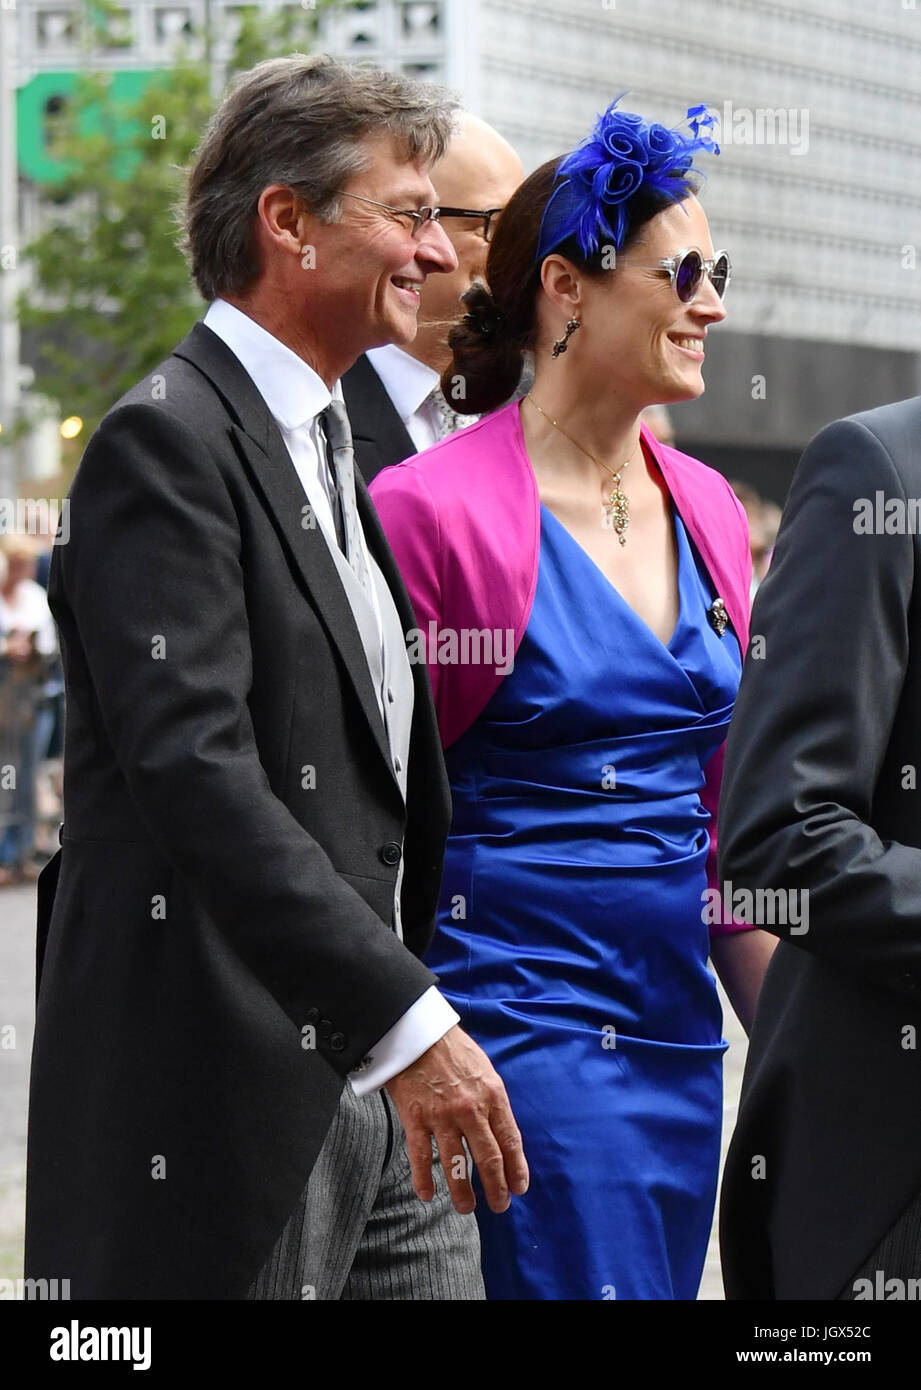 Hanover, Germany. 8th July, 2017. Heinrich Prinz von Hannover and Thyra Prinzessin von Hannover arrive for the church wedding of Ernst August jr. and Ekaterina of Hanover at the Herrenhausen Gardens in Hanover, Germany, 8 July 2017. Photo: Hauke-Christian Dittrich/dpa/Alamy Live News Stock Photo